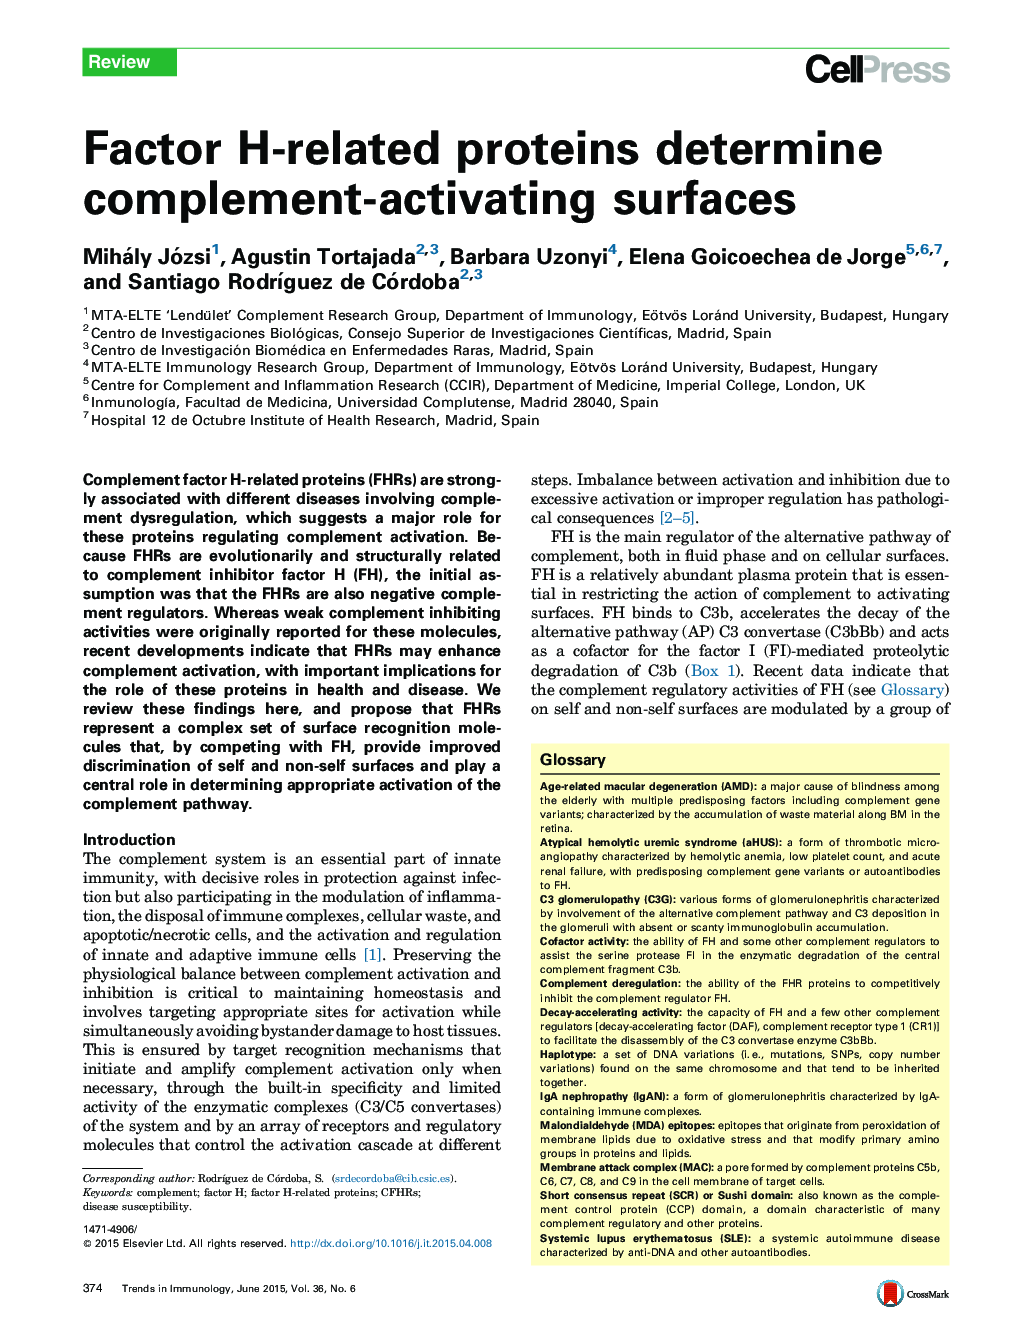 Factor H-related proteins determine complement-activating surfaces